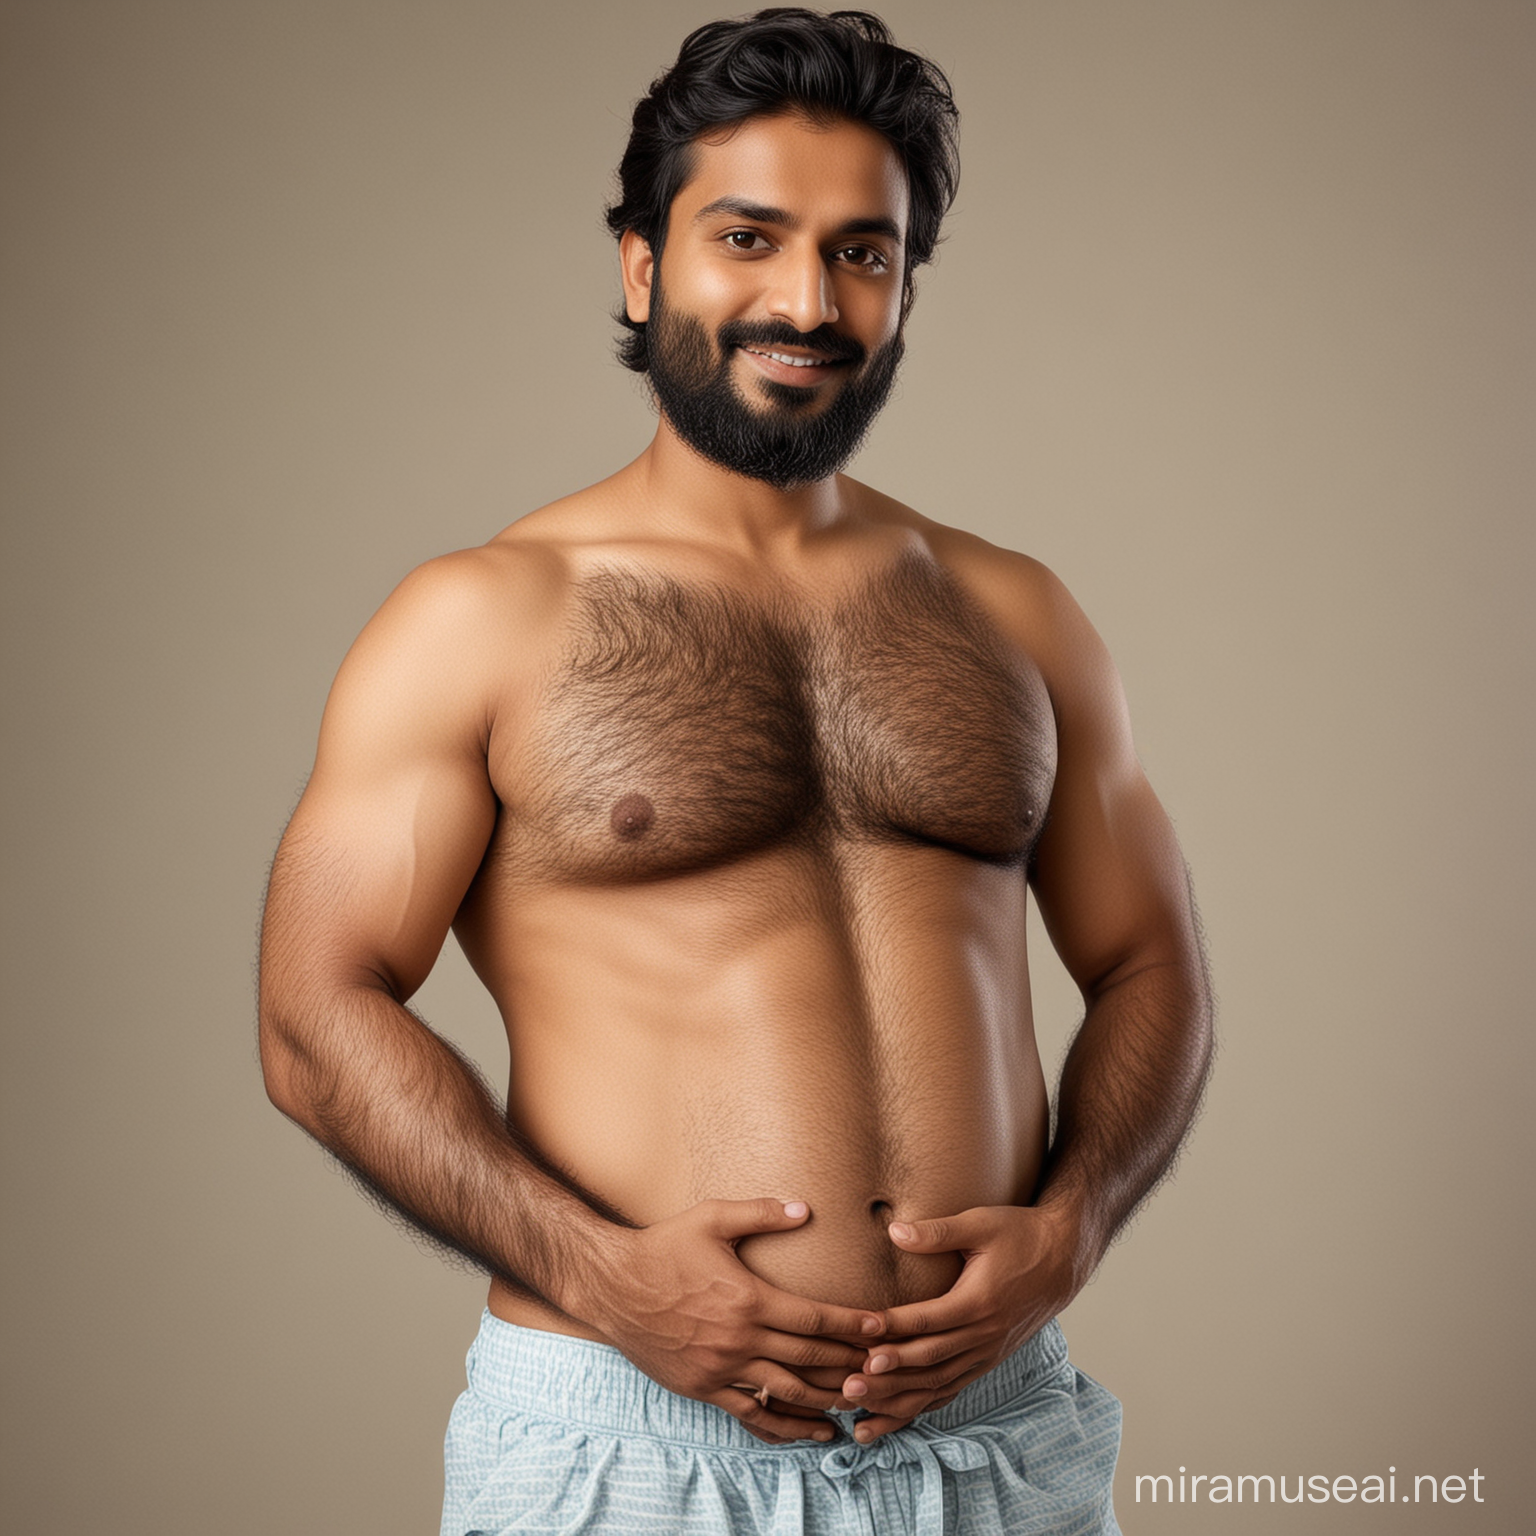 Handsome pregnant indian man, hairy body, hand on belly